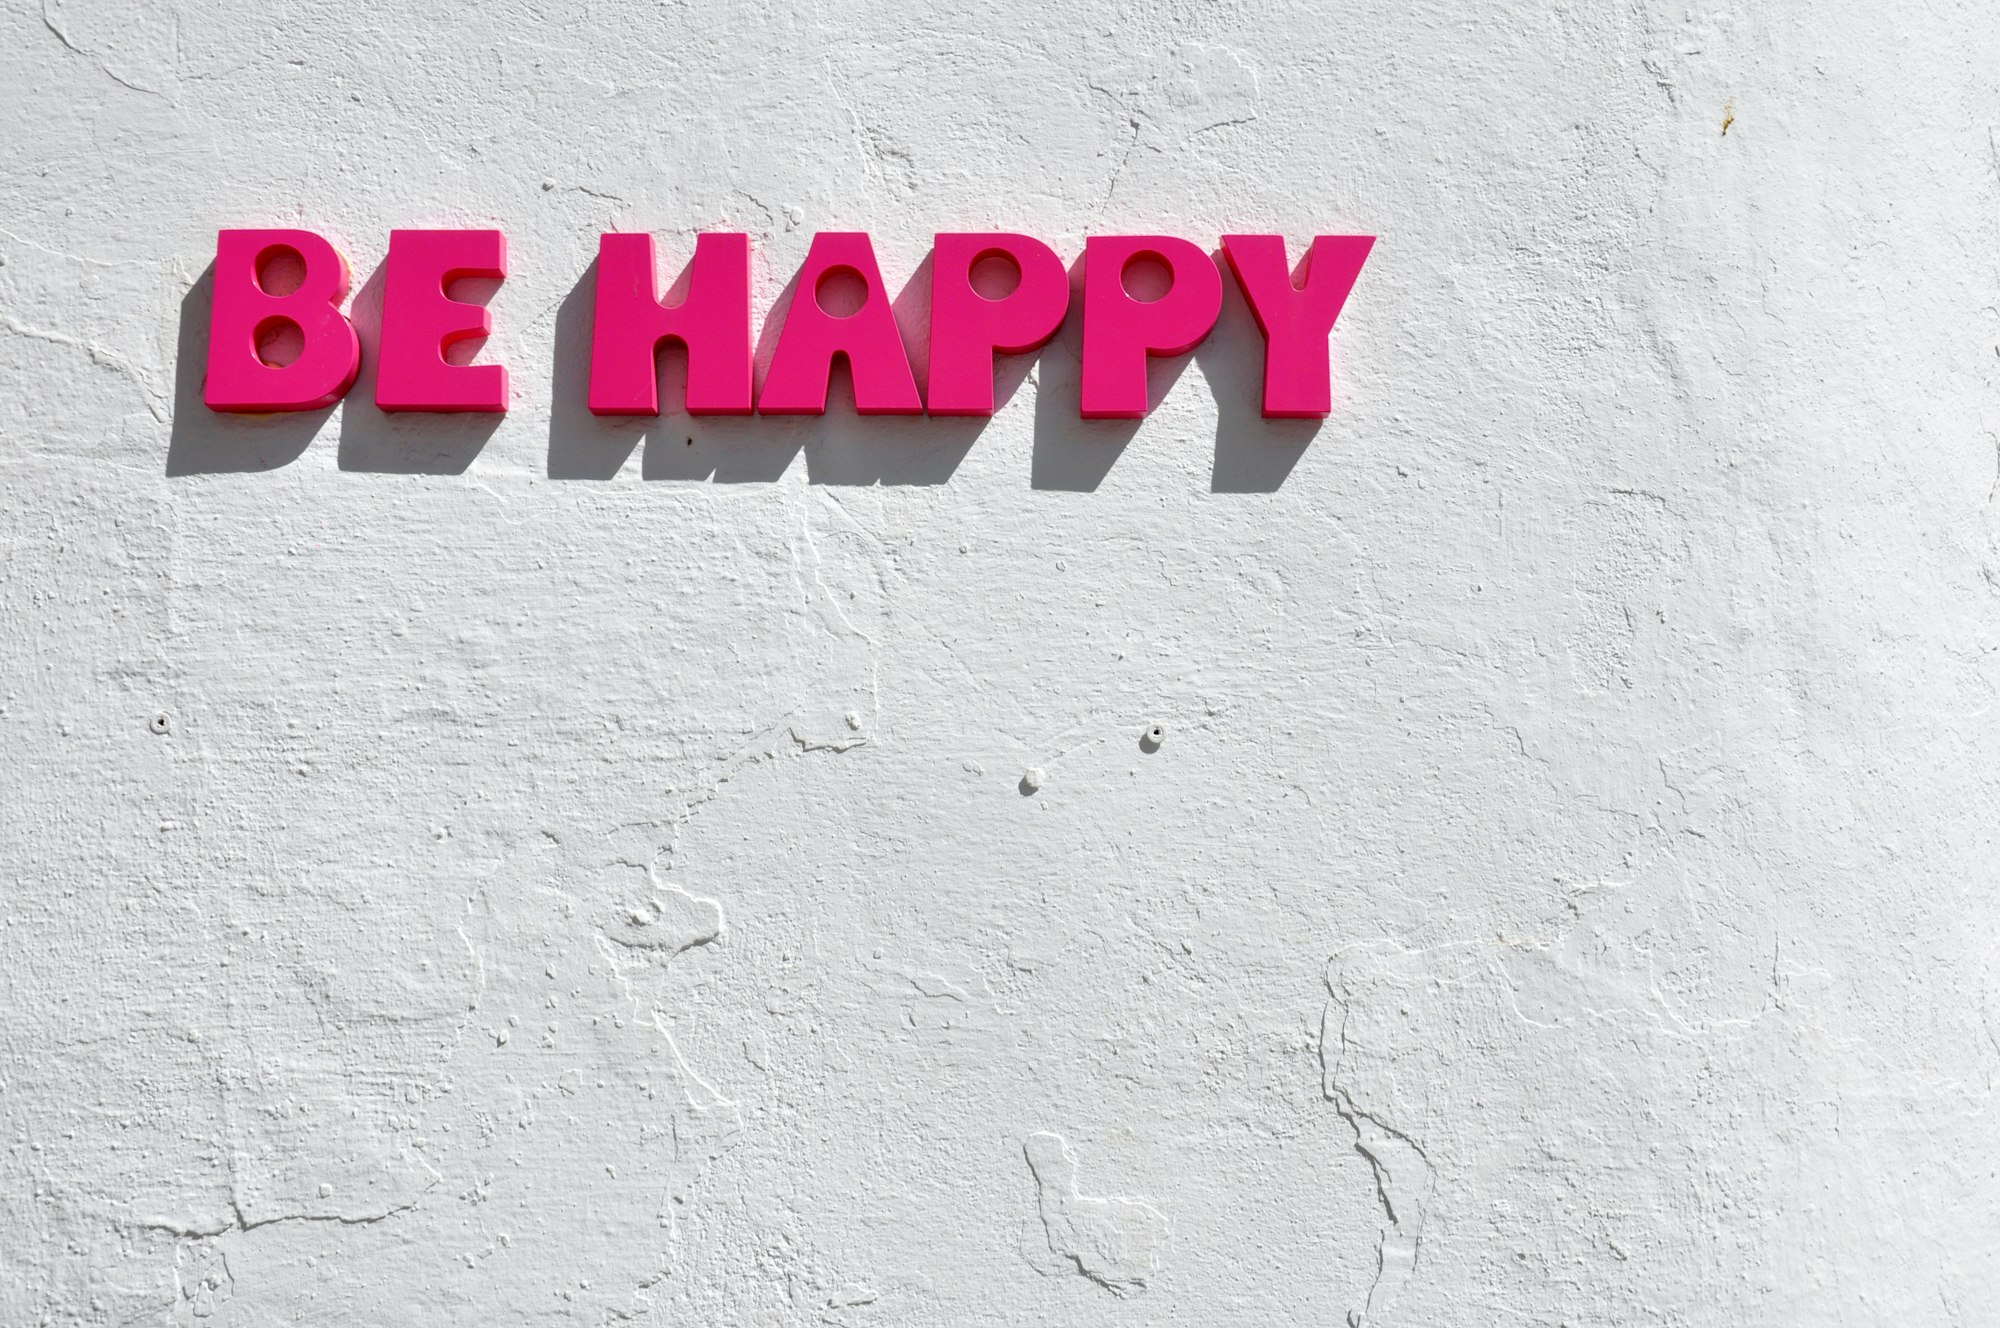 short and cute quote: be happy